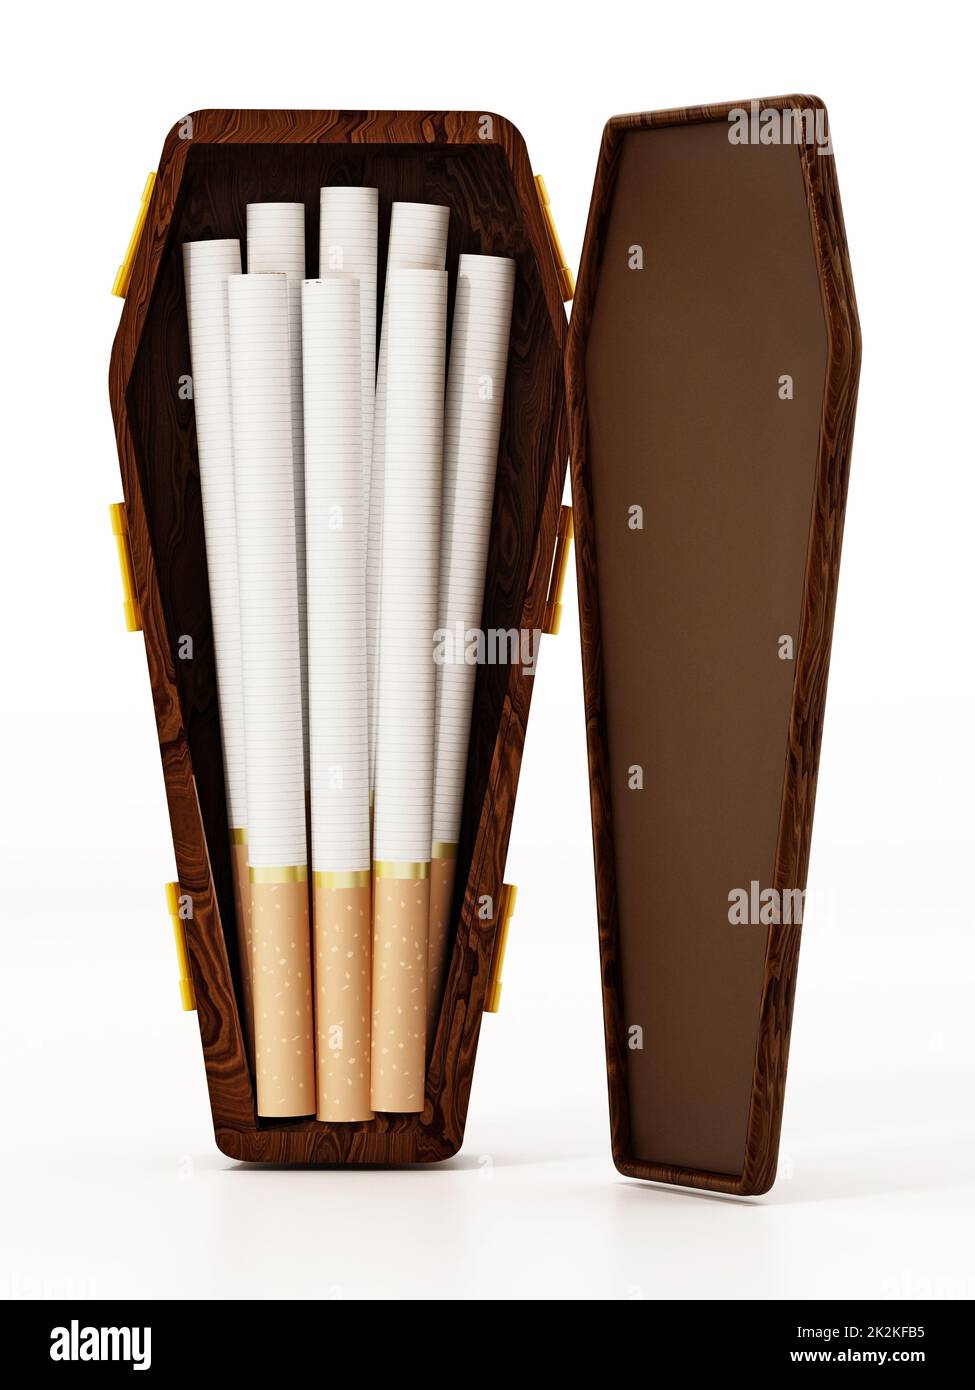 Cigarettes inside half open coffin isolated on white background. 3D illustration Stock Photo